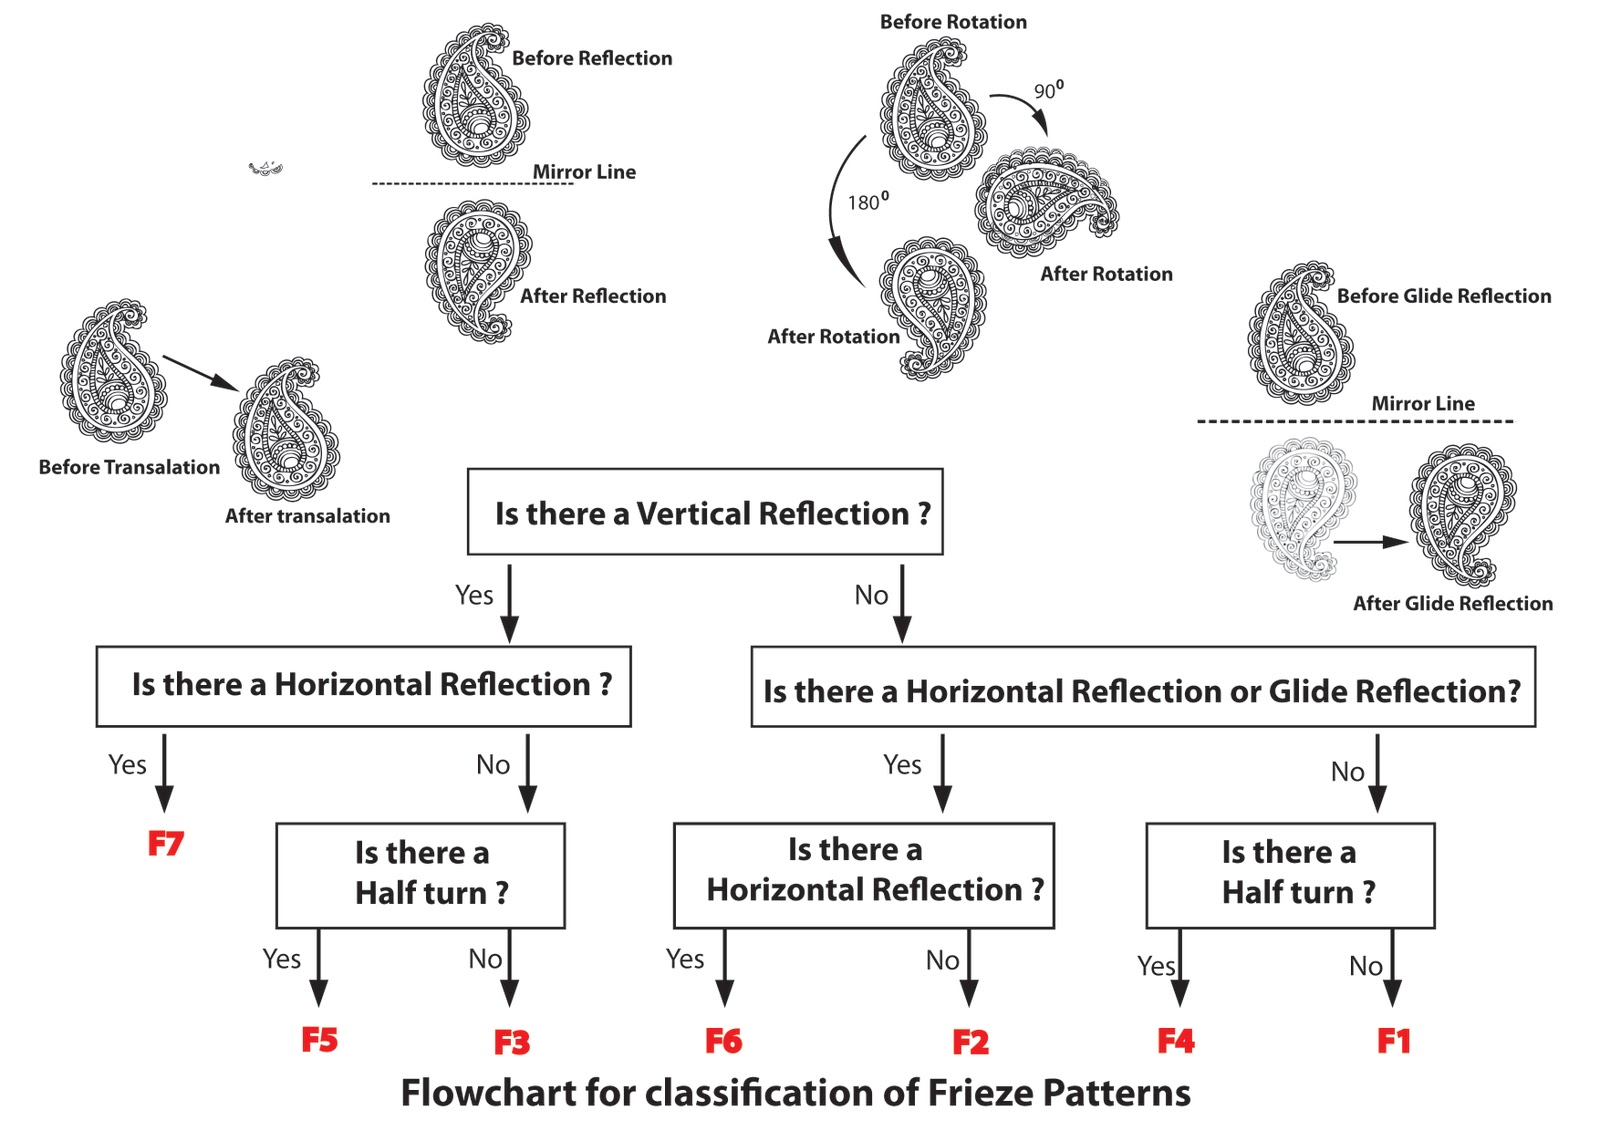 The Flowchart Can You Classify Various Patterns Given In Fig